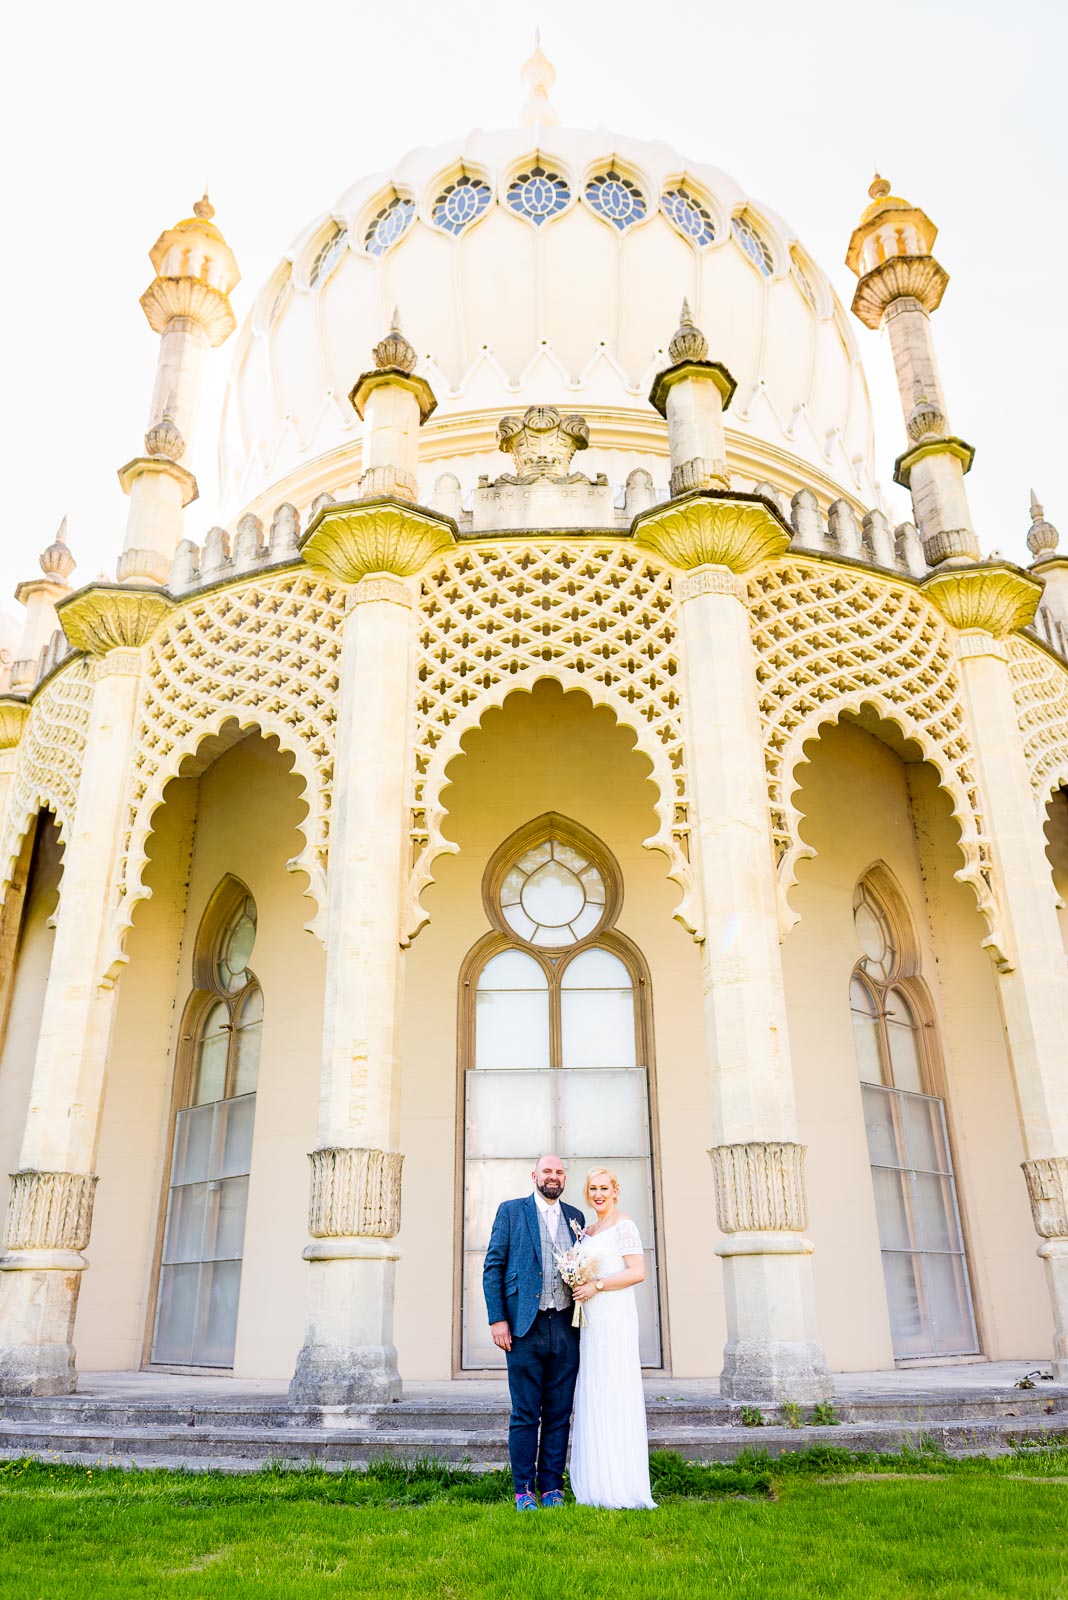 Georgina and Andy smile outside Brighton Royal Pavilion after their Wedding.